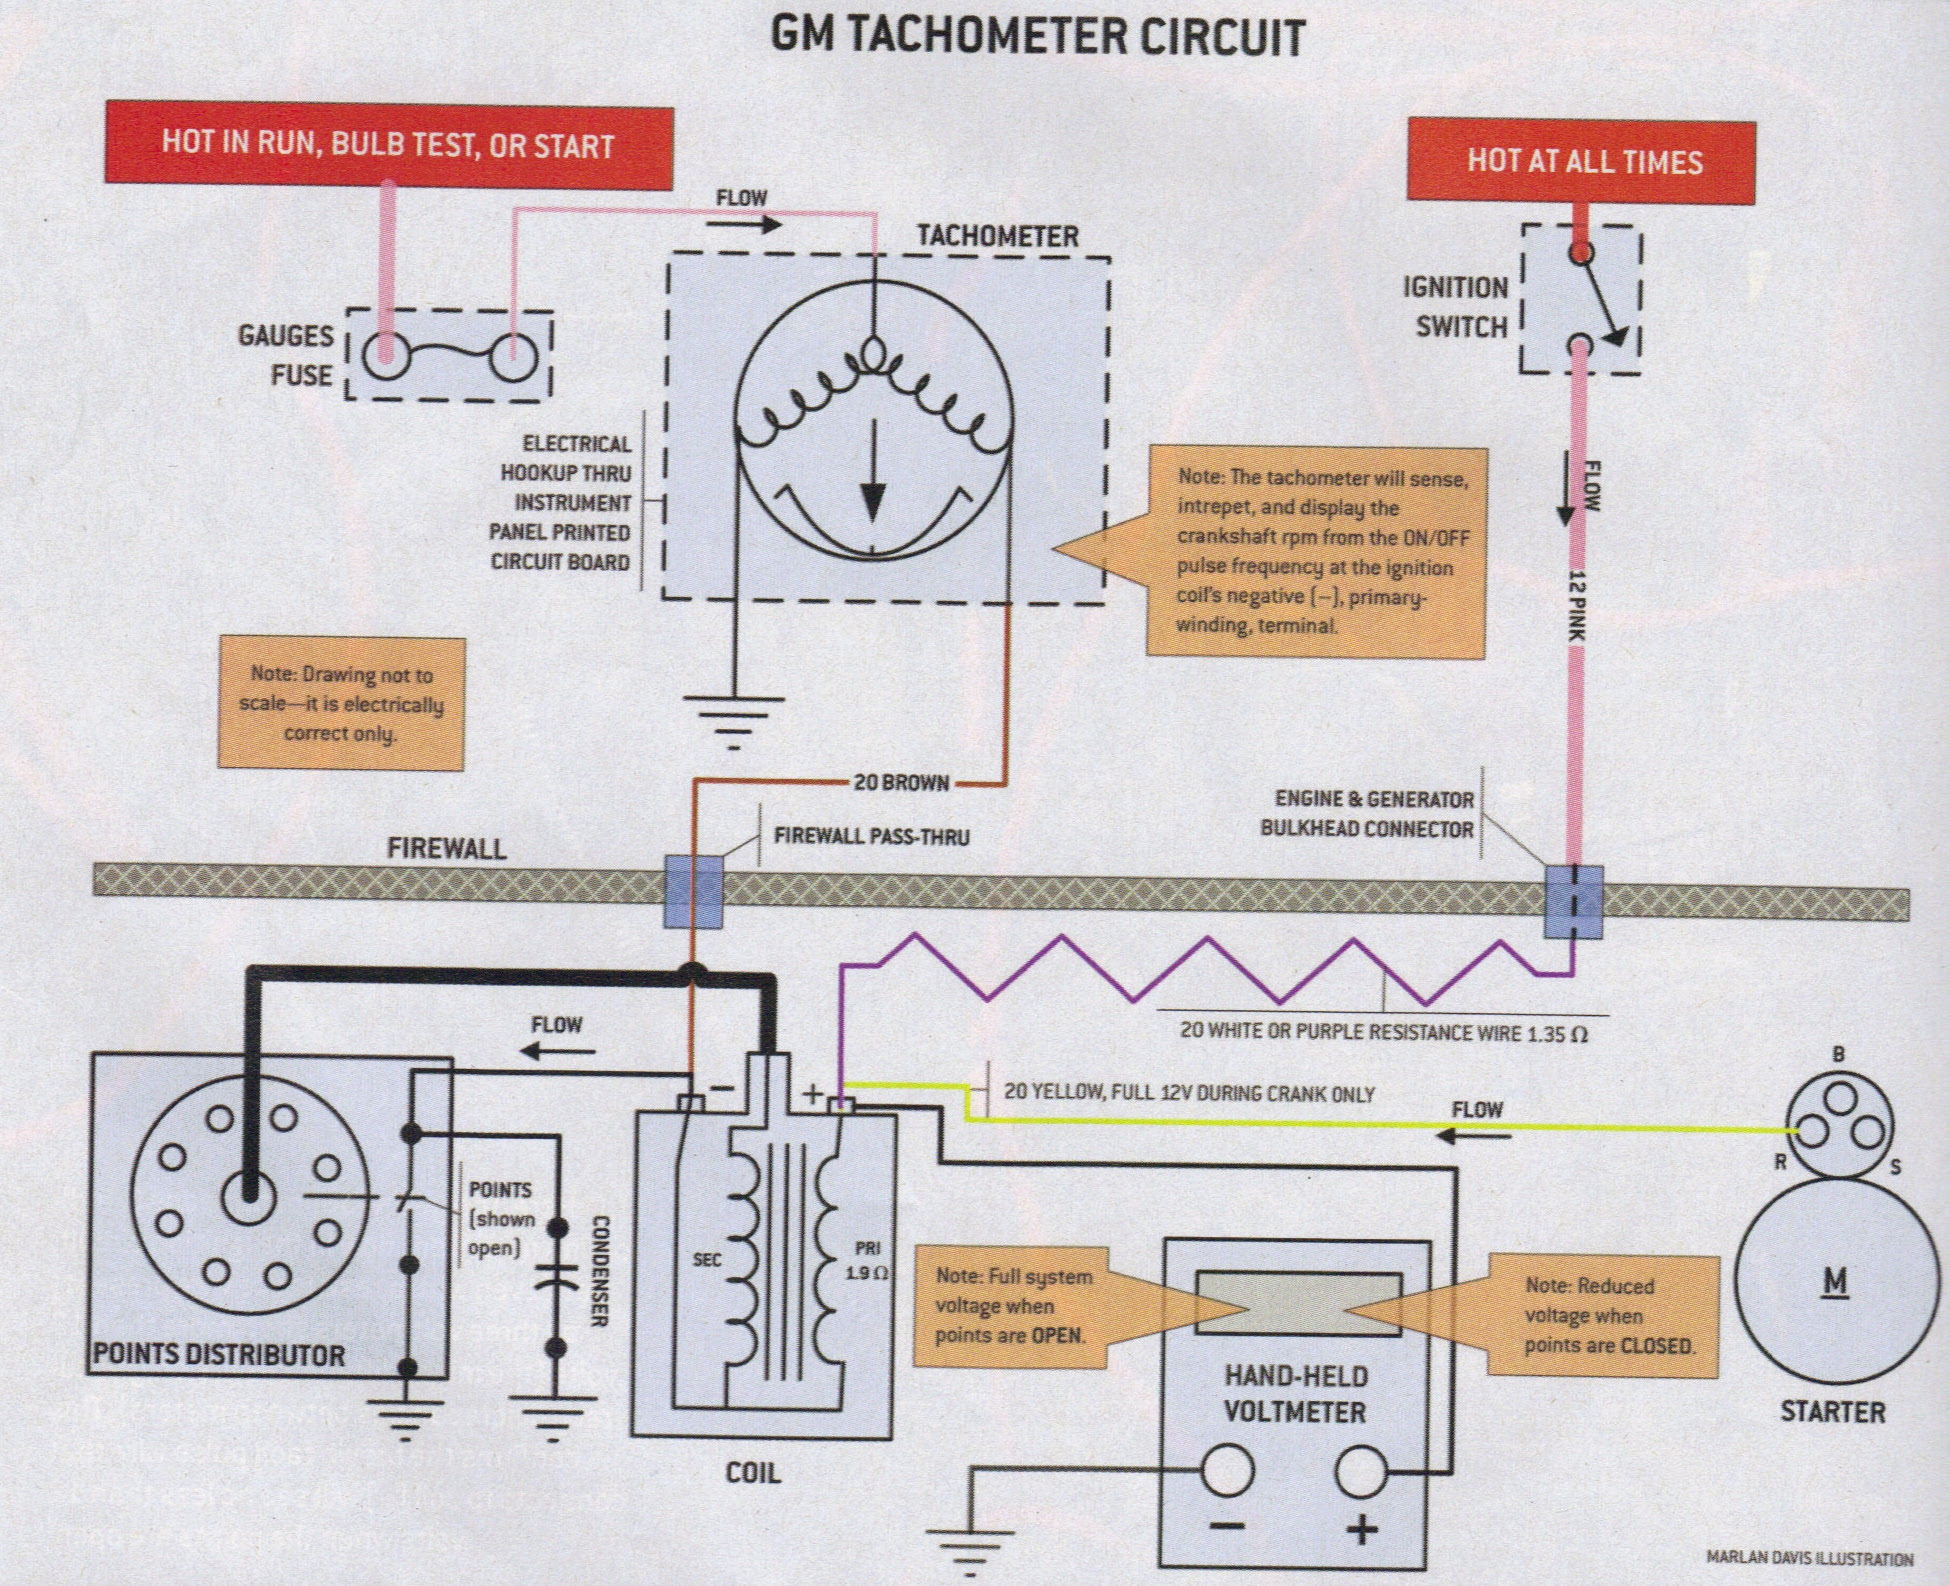 67 Gm Ignition Switch Wiring Diagram - Wiring Diagram Networks